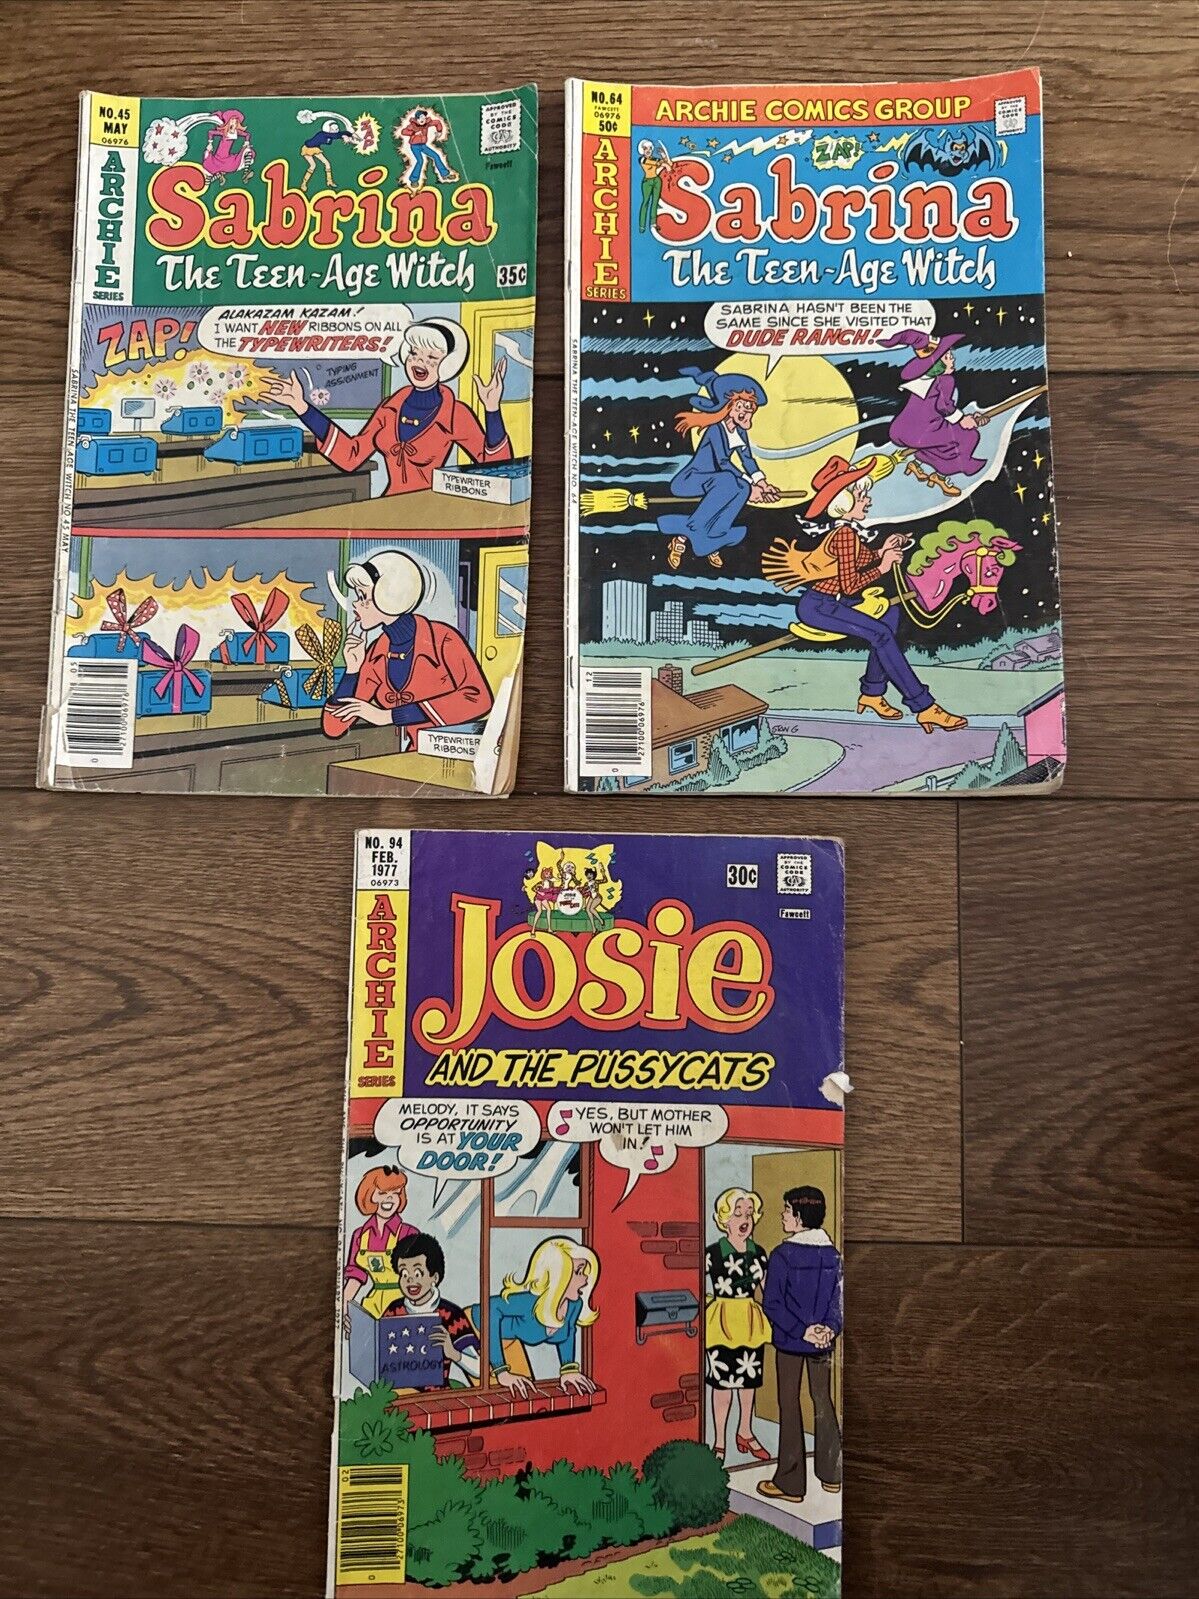 Archie Series Sabrina The Teen Age Witch #45 & 64  May 1976 Jose Andthe pussycat